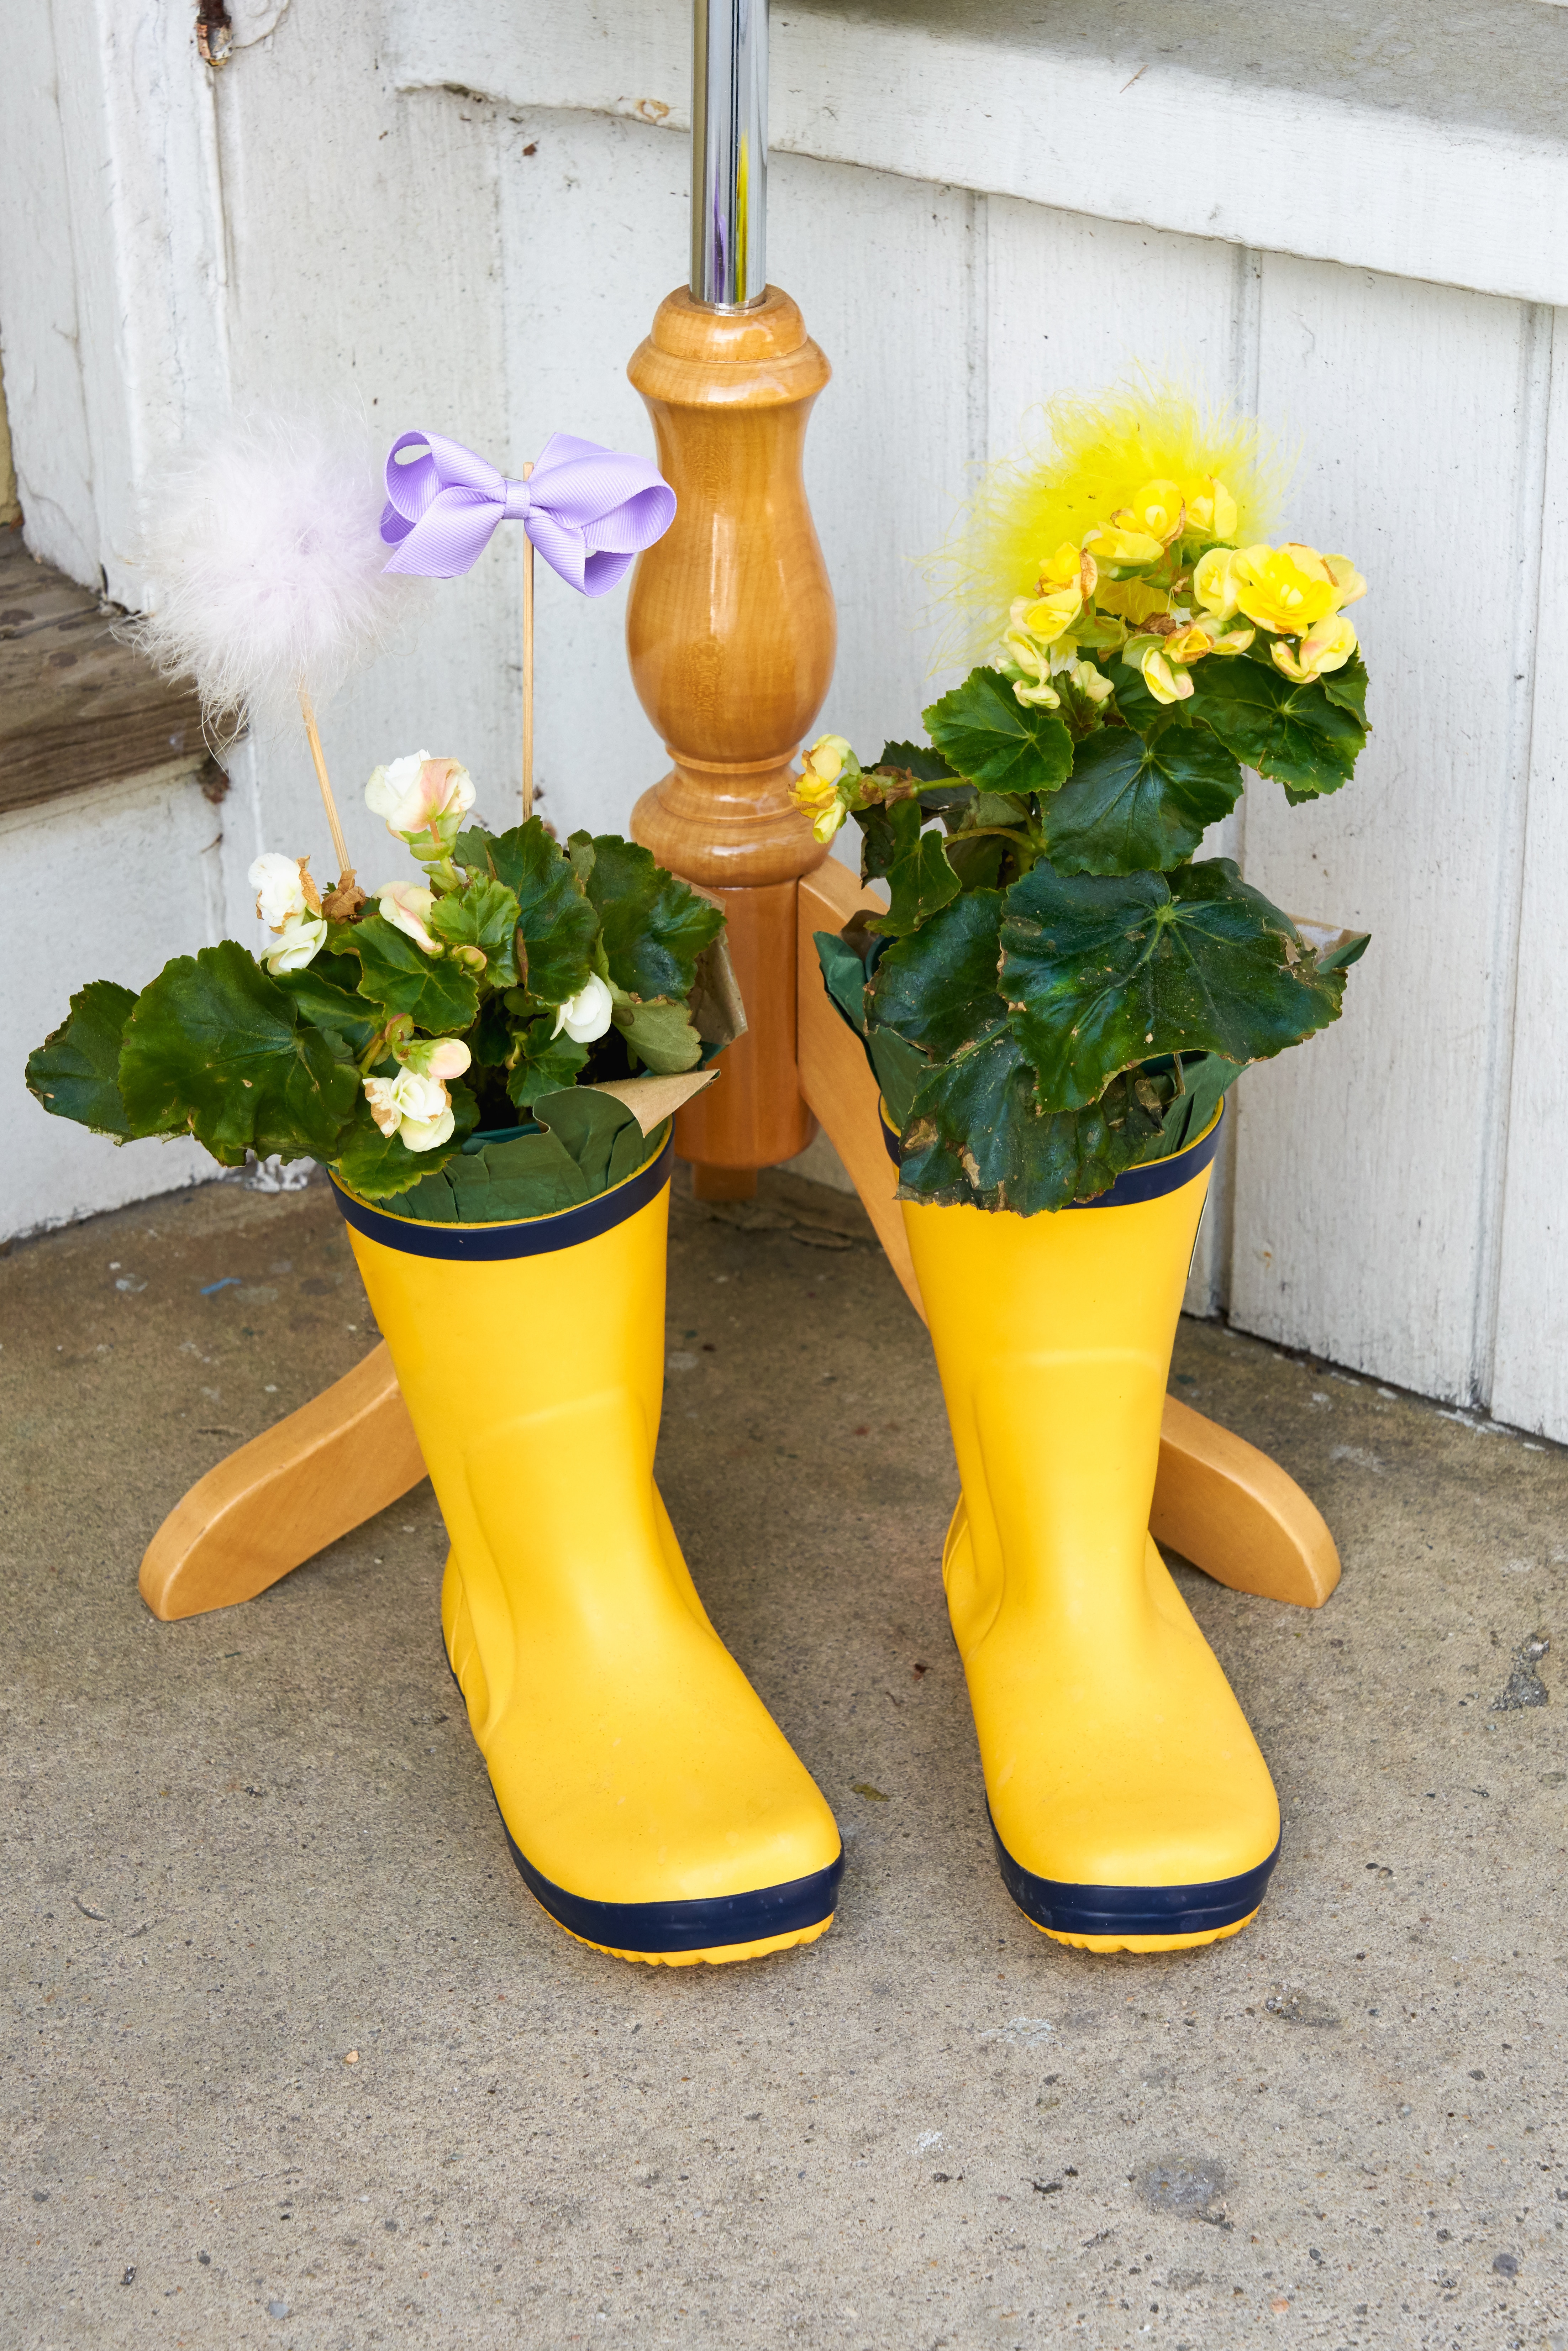 childs bright yellow rubber rain boots used as flower planters sitting on the sidewalk with a lavender ribbon decoration